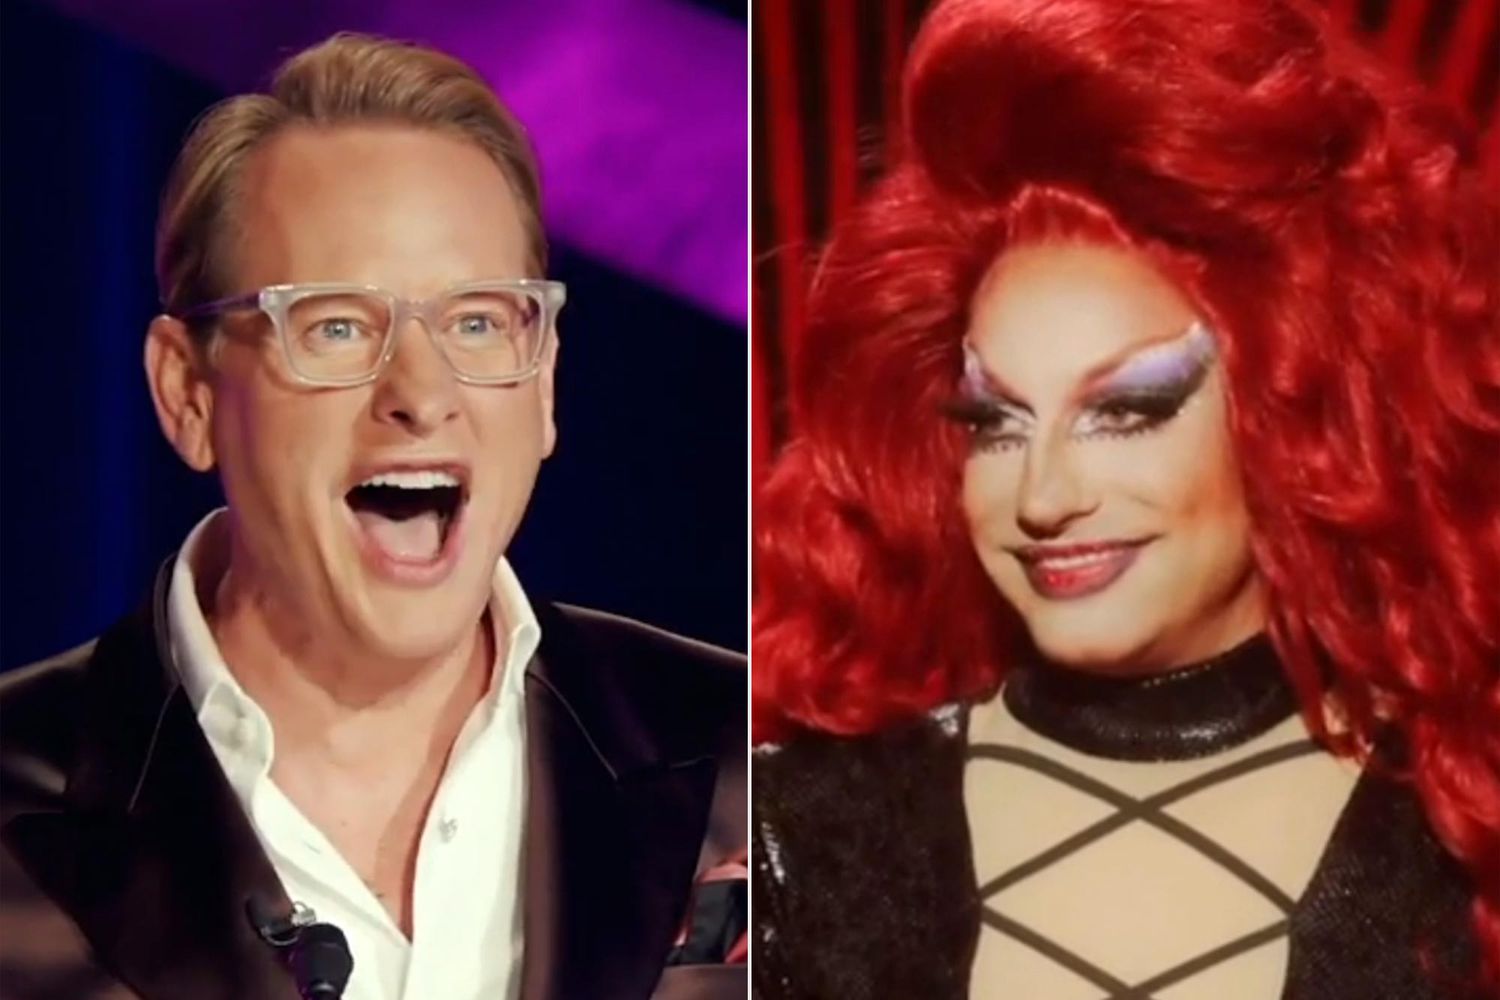 Carson Kressley reacts to Jackie Would reveal